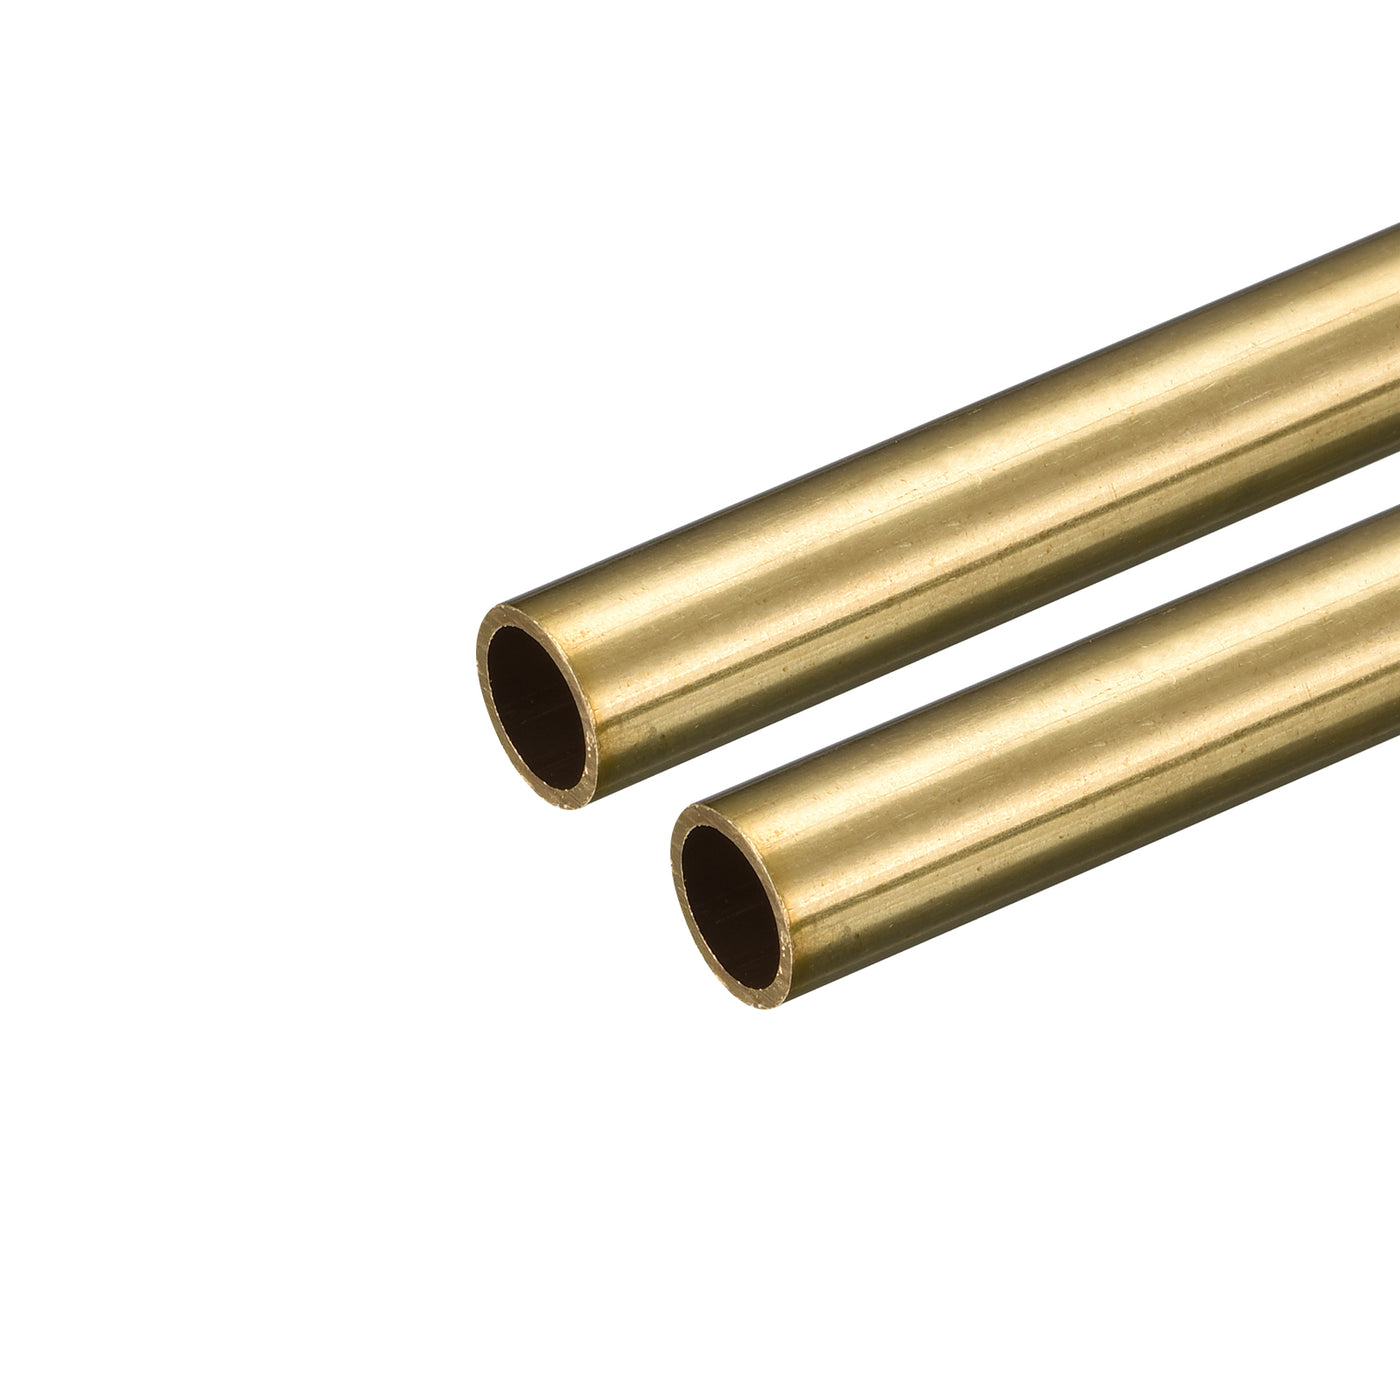 uxcell Uxcell Brass Round Tube 10mm OD 1mm Wall Thickness 250mm Length Pipe Tubing 2 Pcs